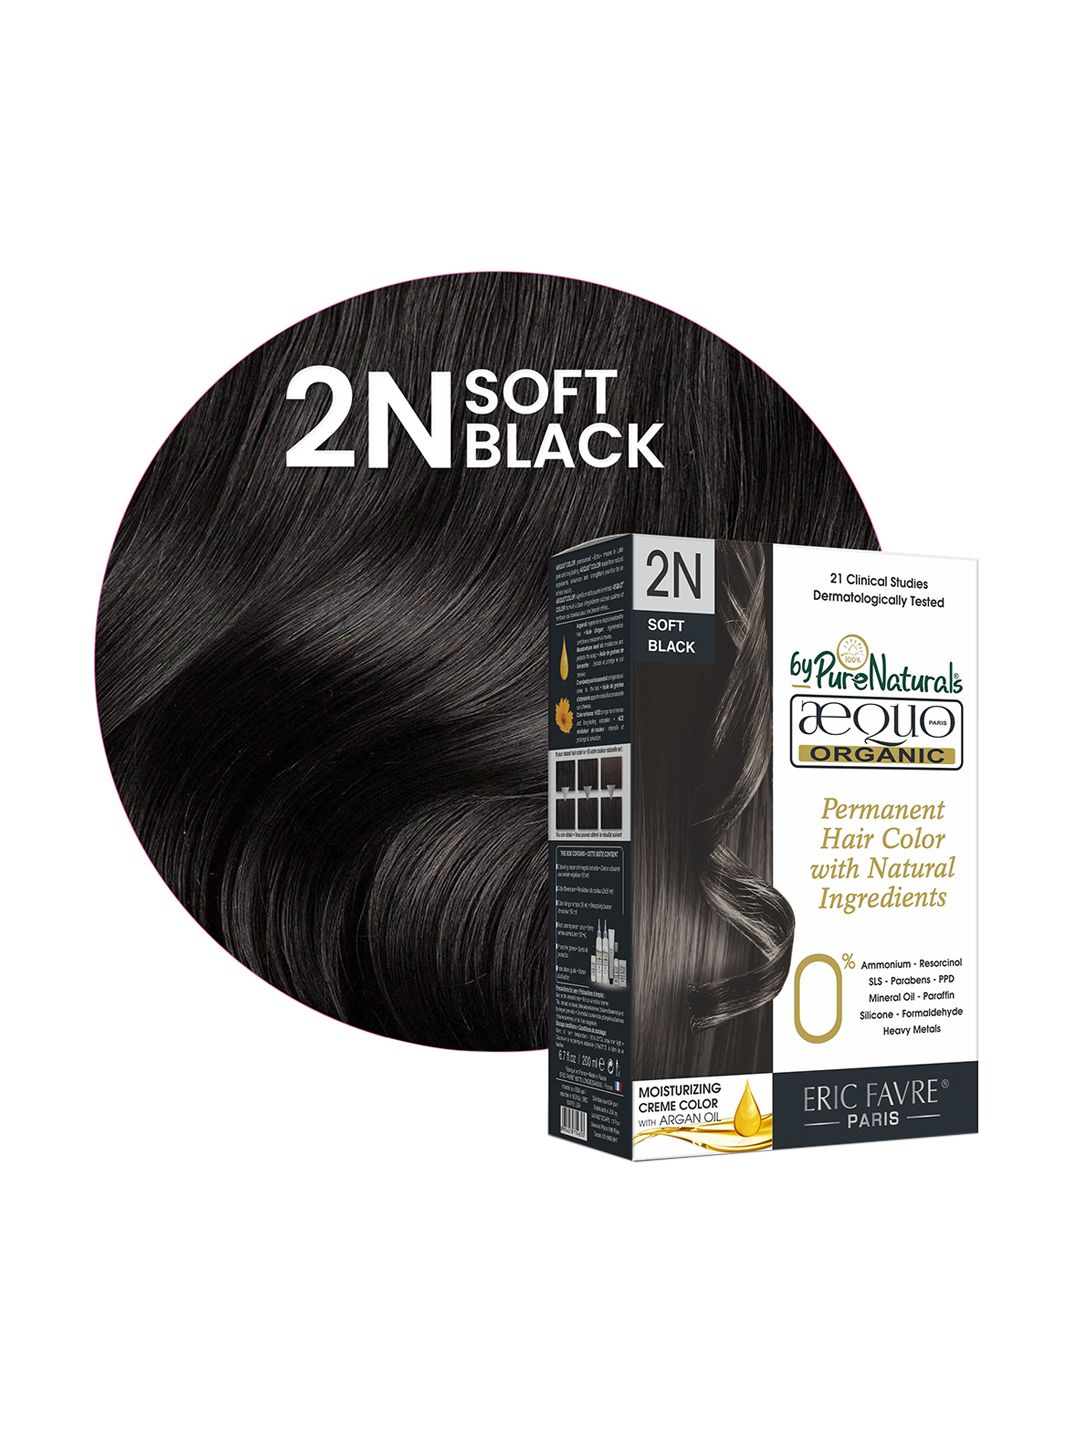 Aequo Organic Set Of 2 Permanent Hair Color with Natural Ingredients - Soft Black 2N Price in India